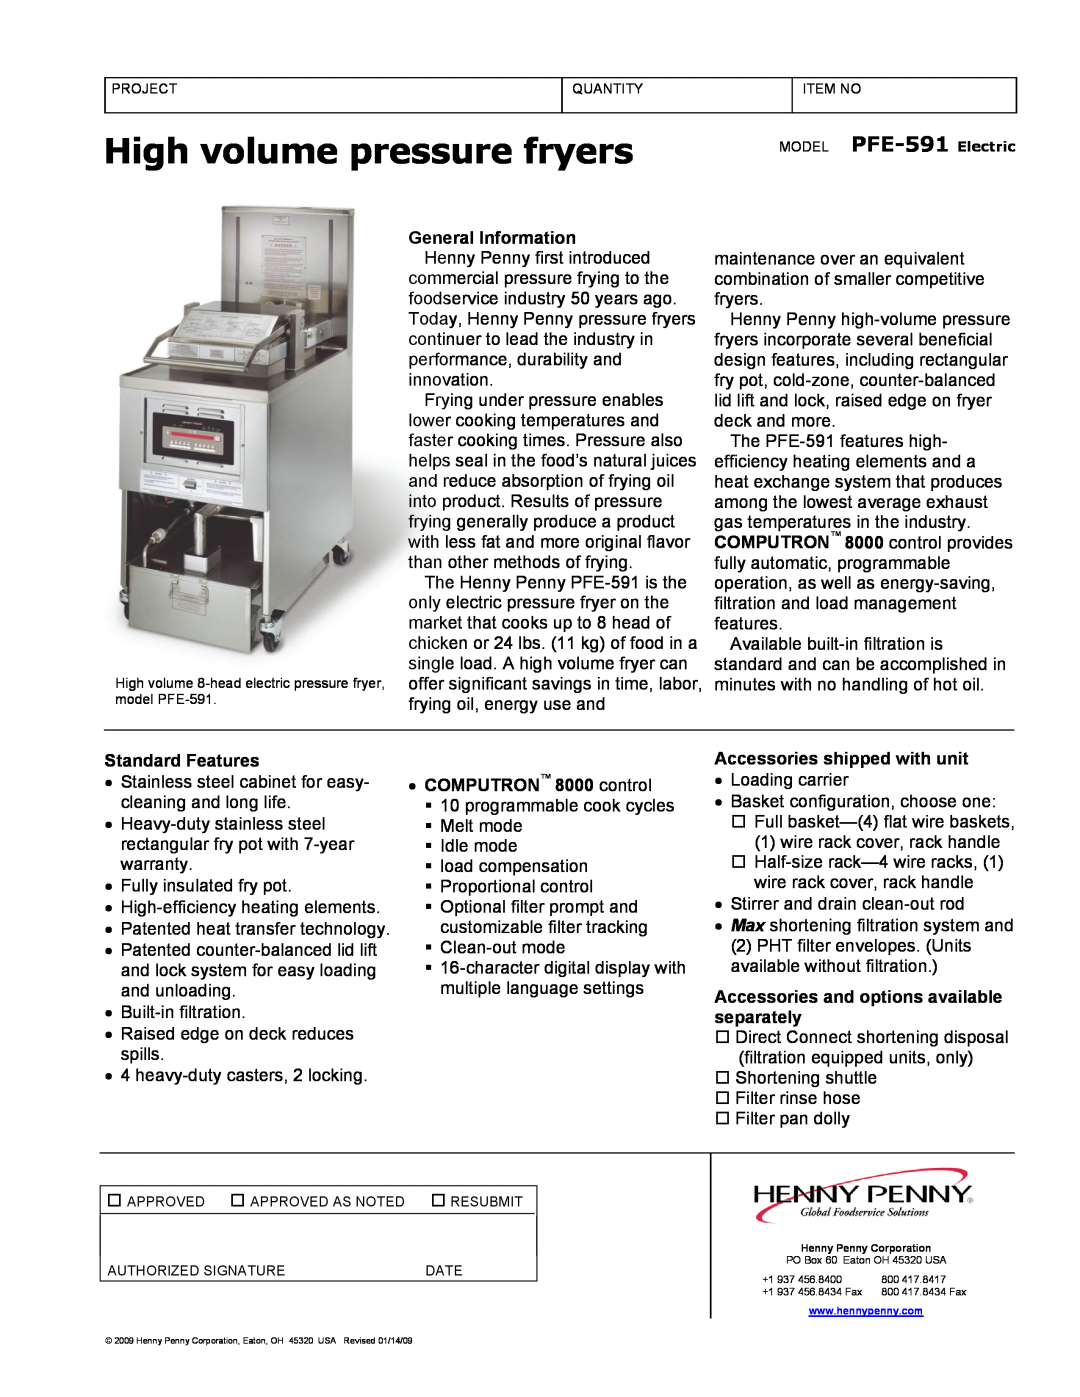 Henny Penny warranty High volume pressure fryers, MODEL PFE-591 Electric, Standard Features, COMPUTRON 8000 control 